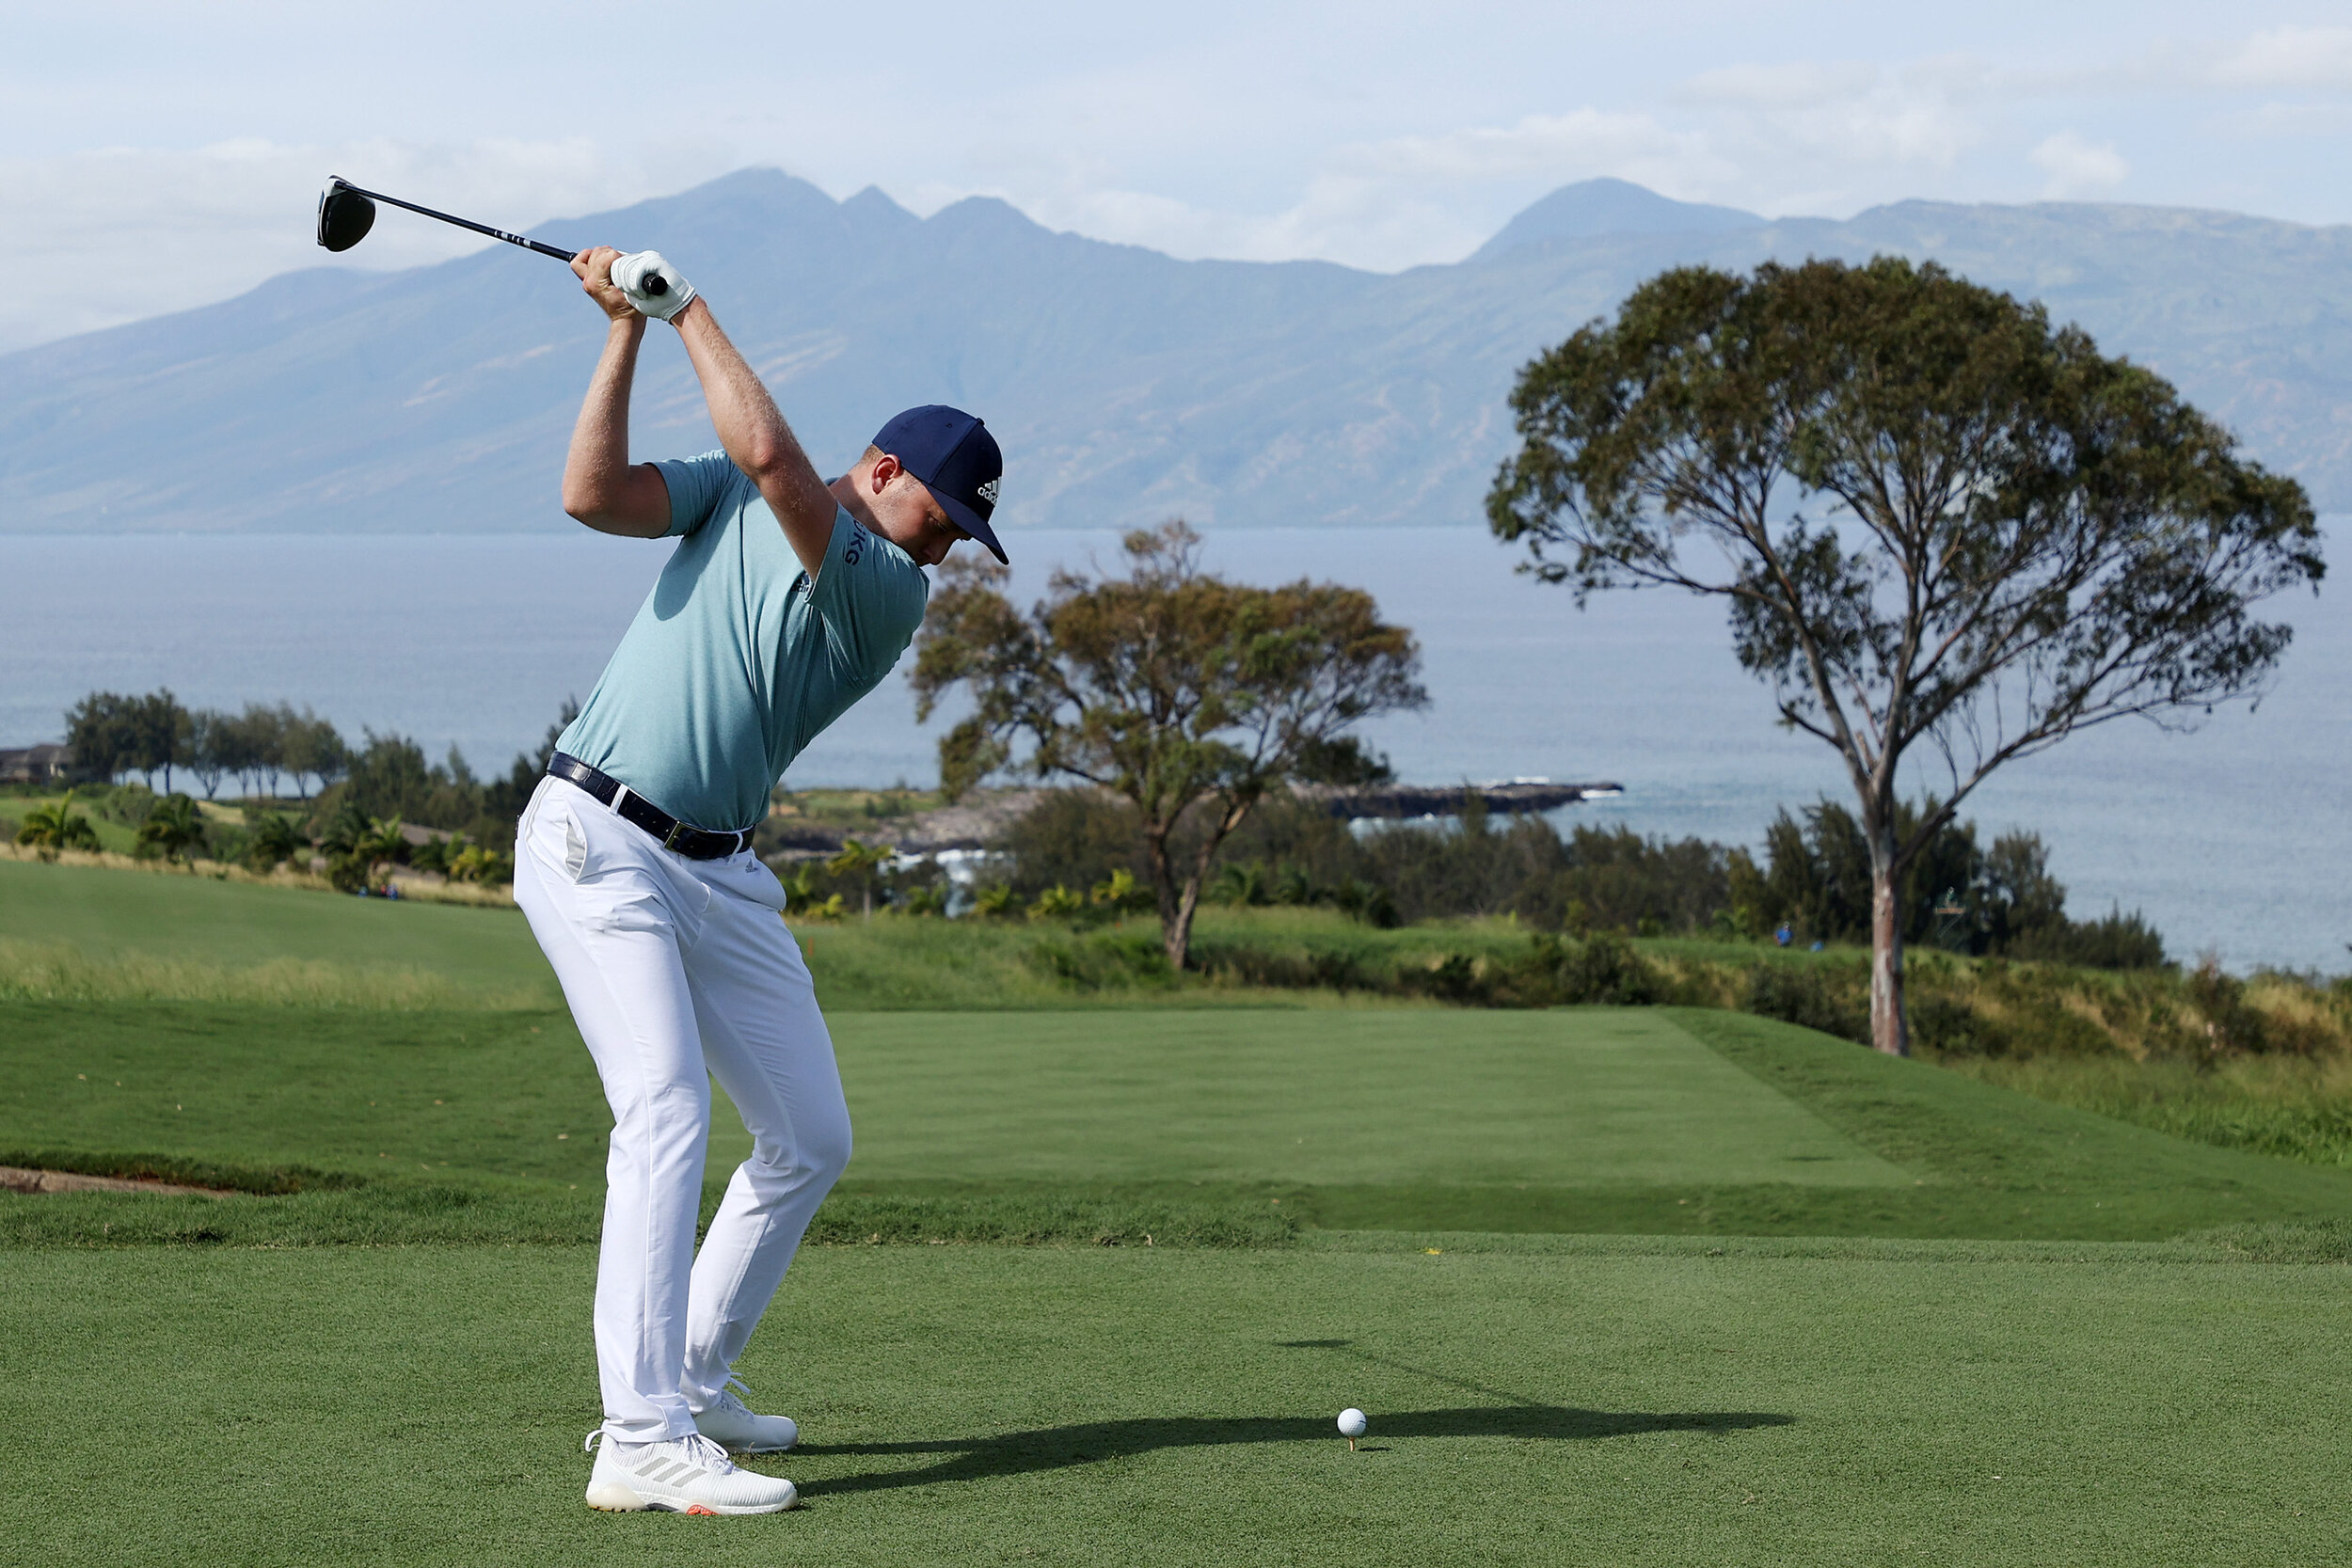  KAPALUA, HAWAII - JANUARY 08: Daniel Berger of the United States plays his shot from the seventh tee during the second round of the Sentry Tournament Of Champions at the Kapalua Plantation Course on January 08, 2021 in Kapalua, Hawaii. (Photo by Gre